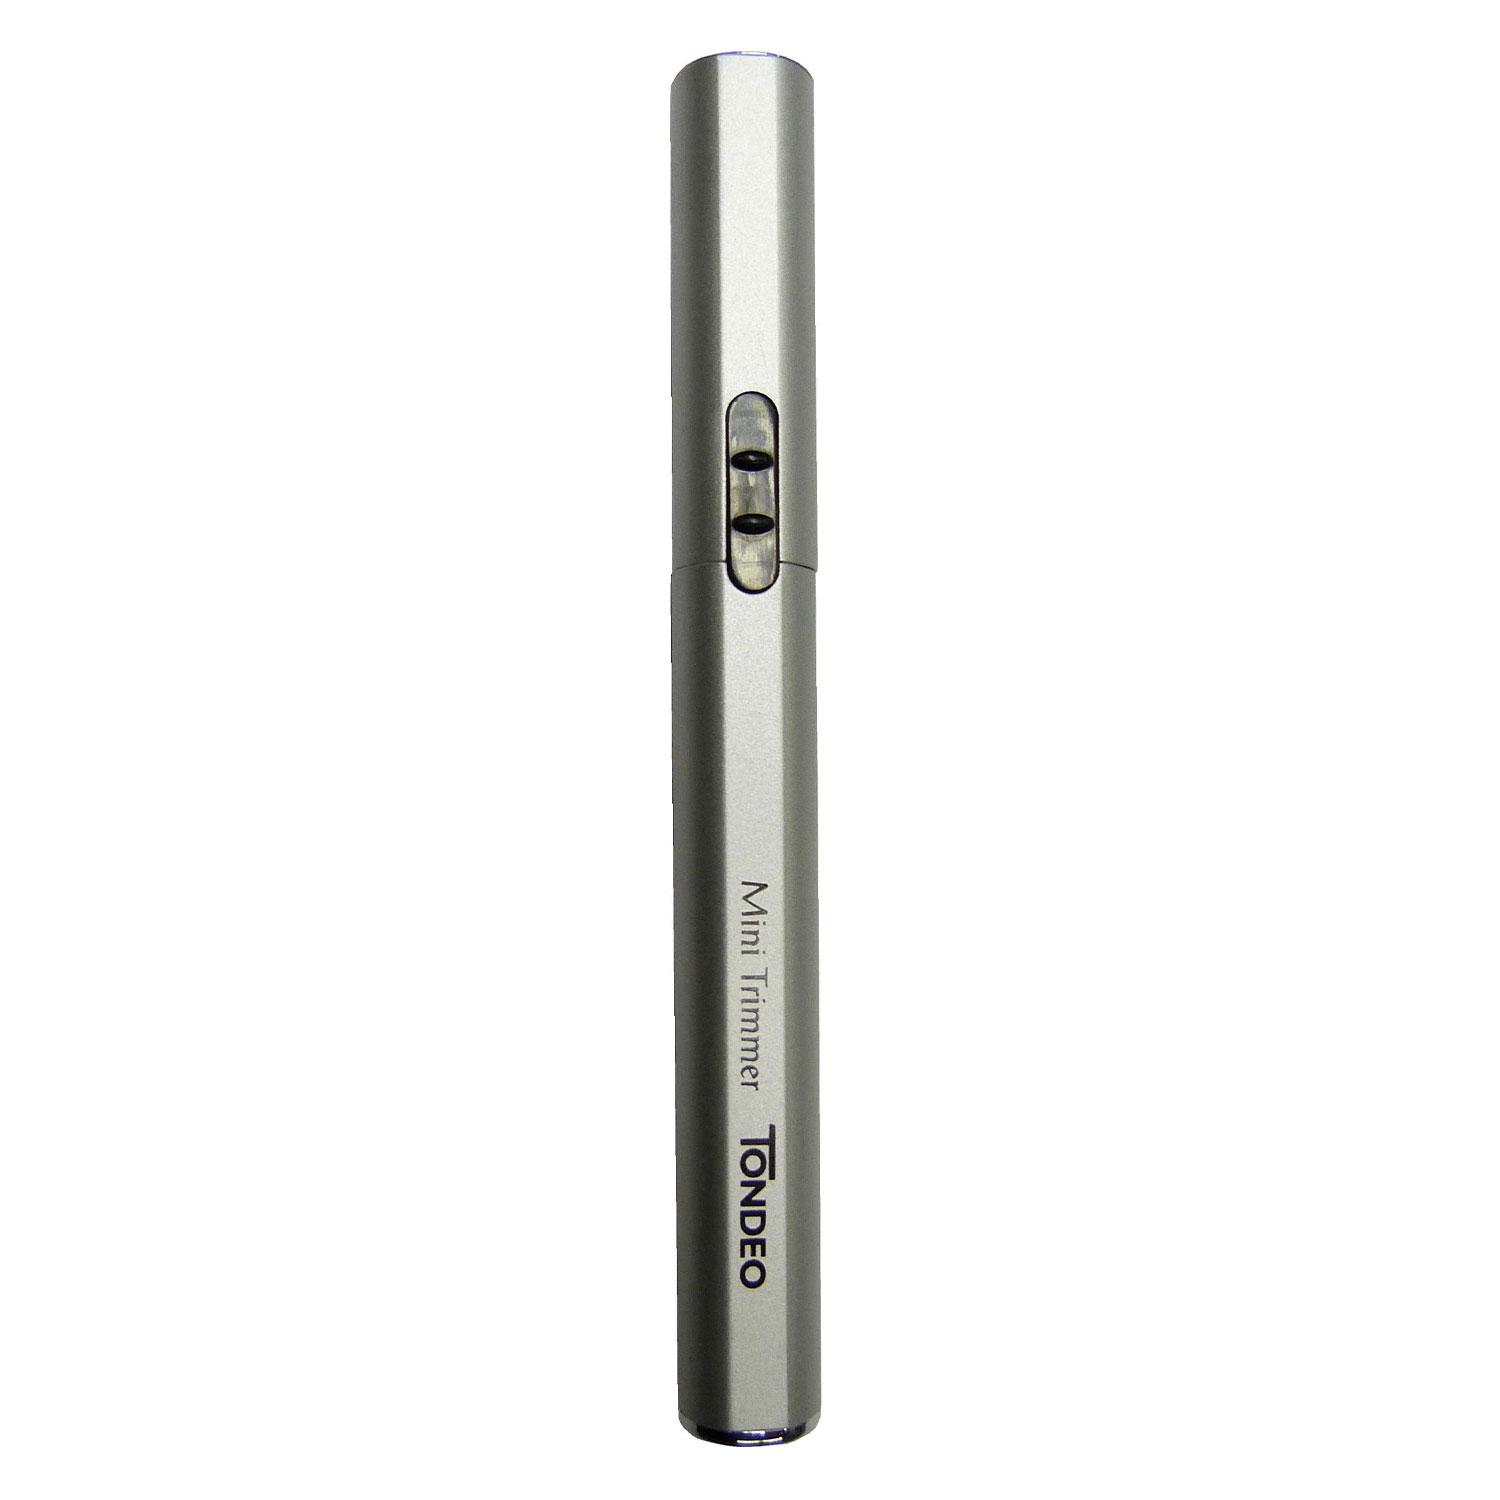 Tondeo Hair Clippers - Tondeo Mini-Trimmer Silver